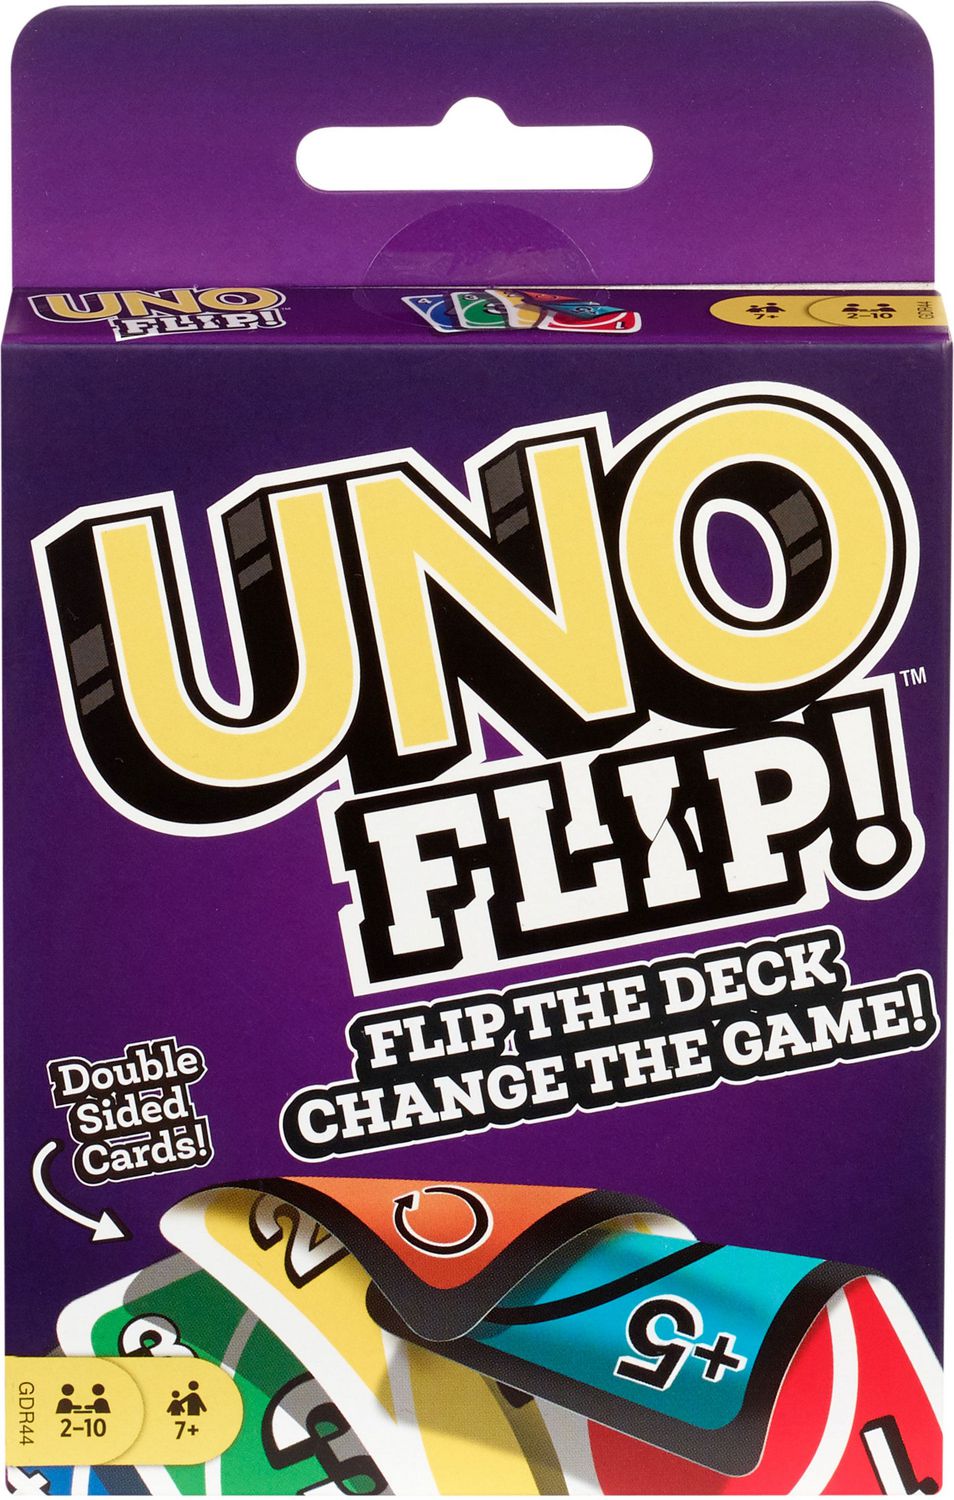 Uno Flip Online Play on the Nintendo Switch - 9 Minute Quick Play 